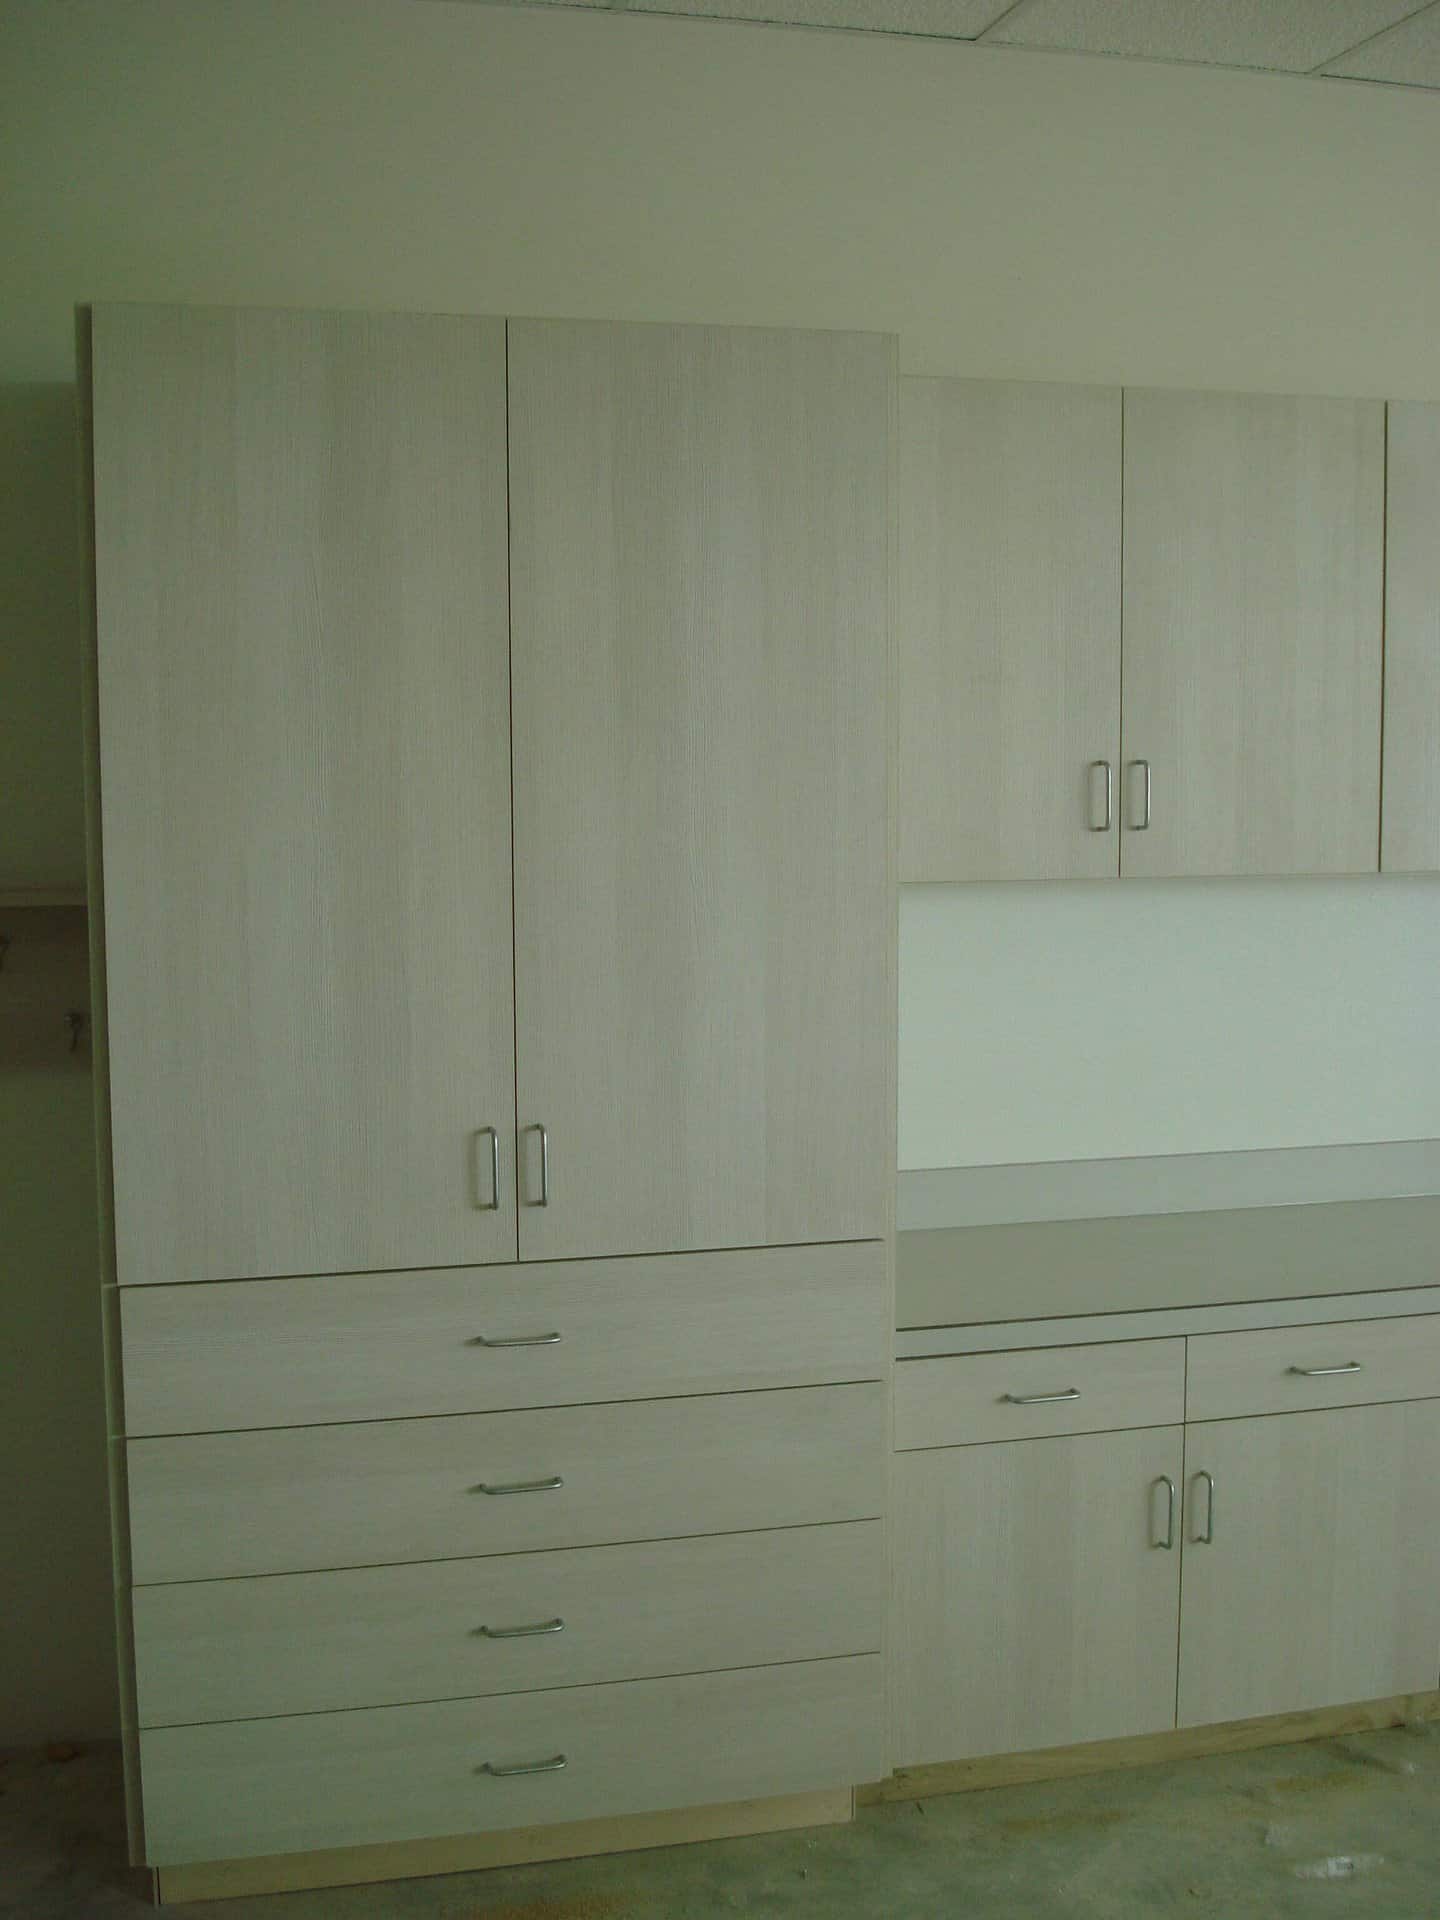 Wooden custom wall cabinets in an office